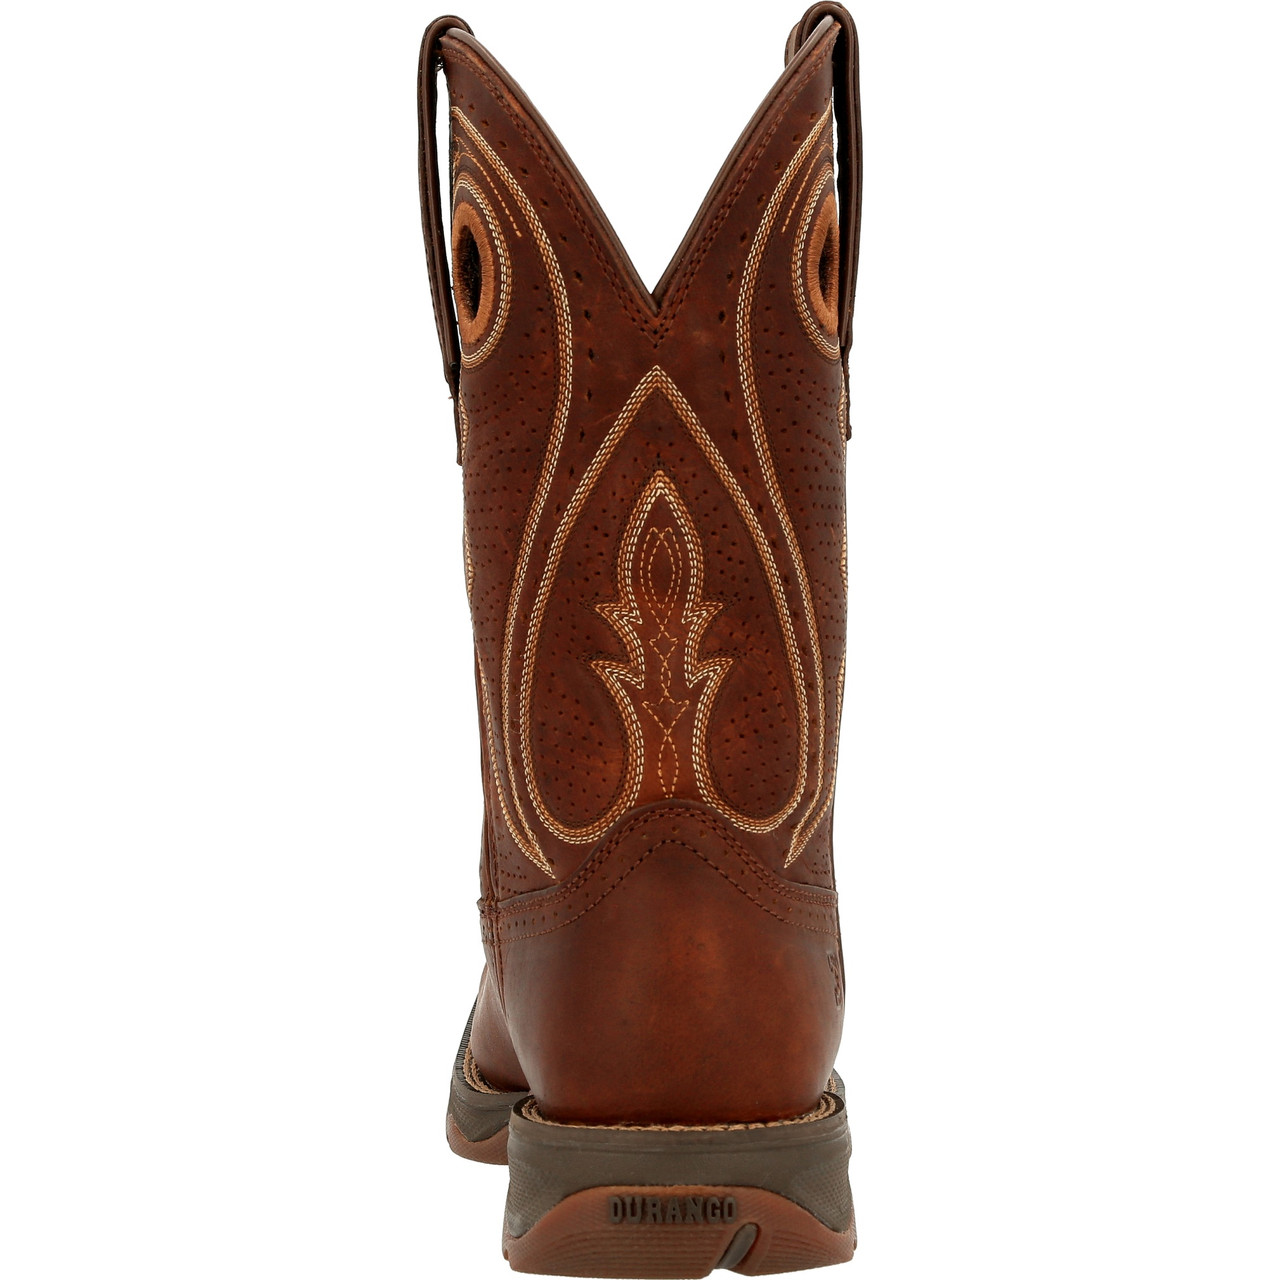 LADY REBEL™ BY DURANGO® WOMEN'S CHESTNUT WESTERN BOOTS DRD0407